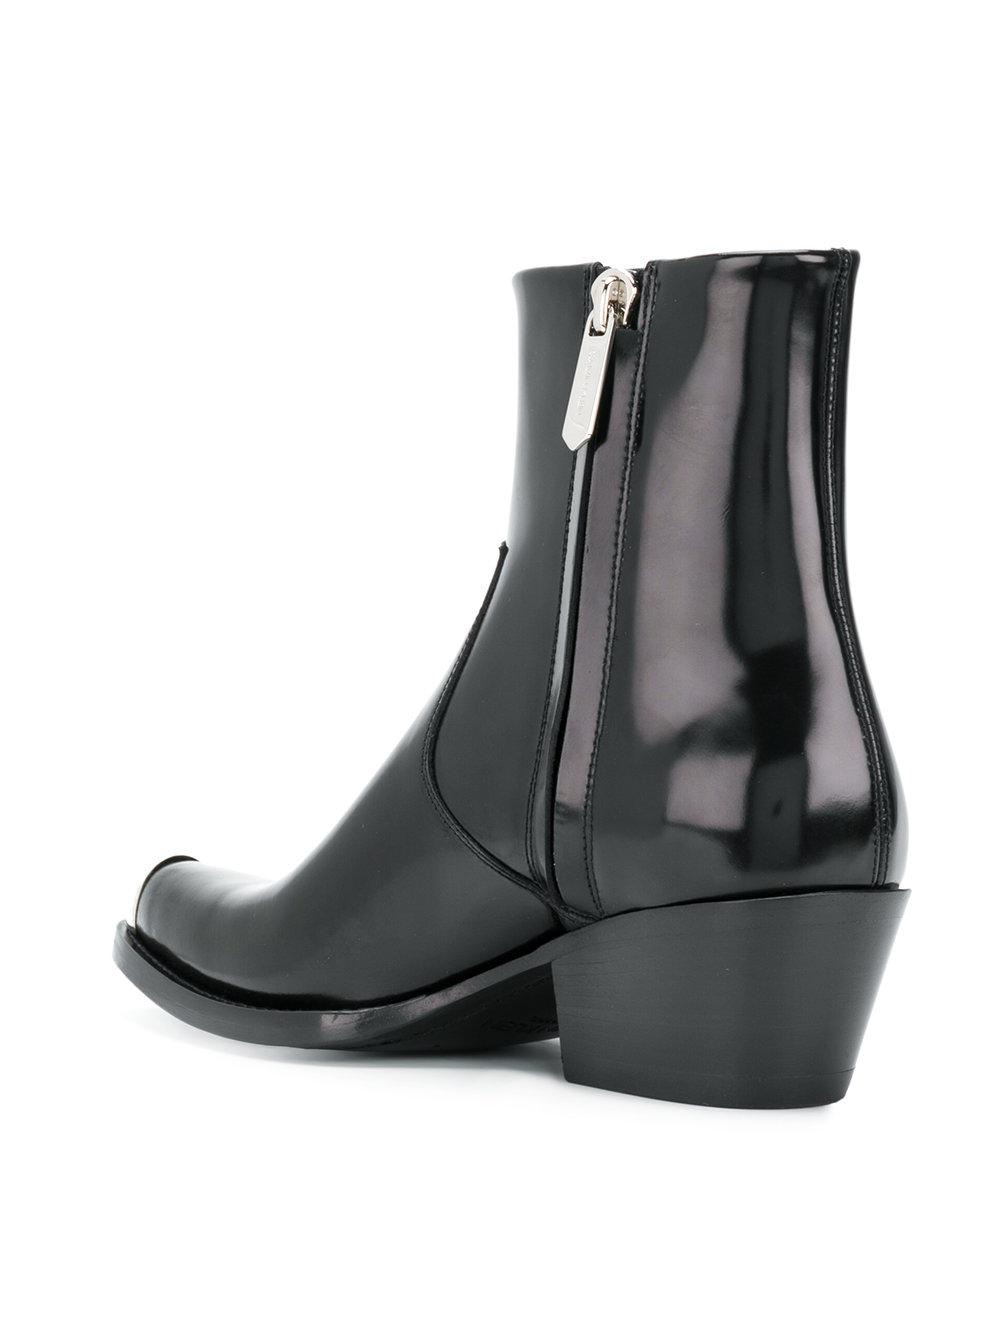 CALVIN KLEIN 205W39NYC Leather Steel Toe Cap Ankle Boots in Black | Lyst